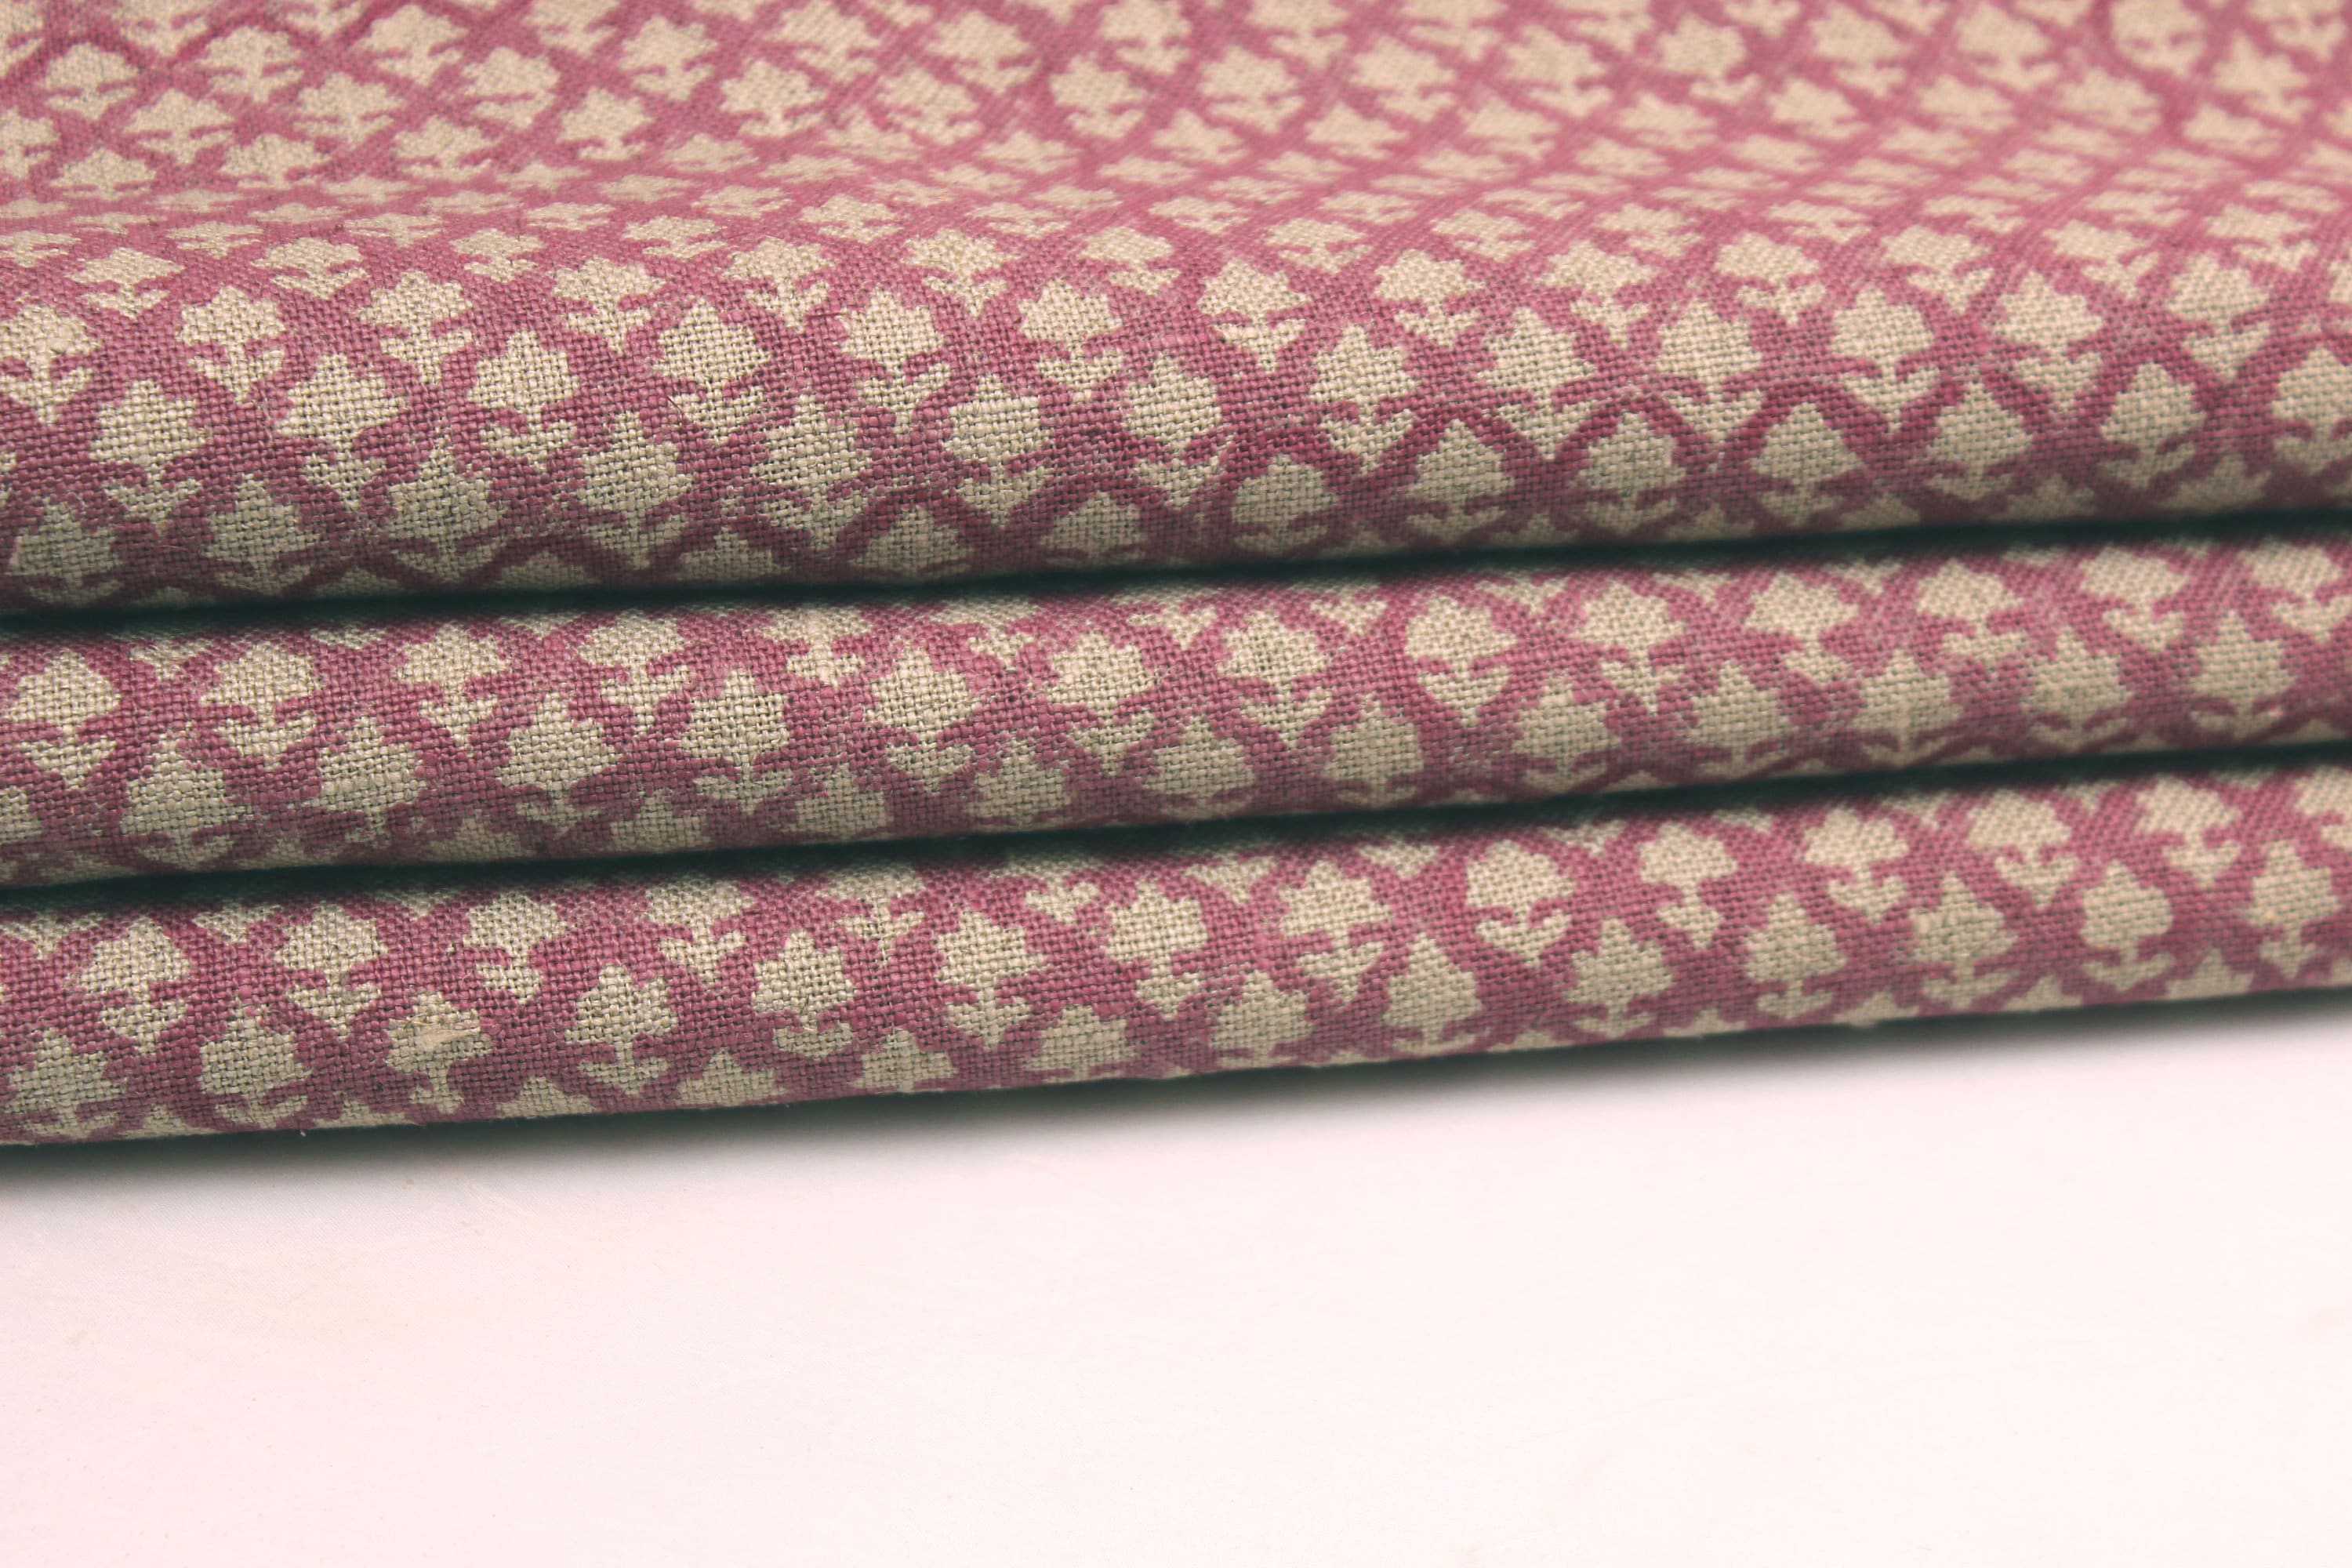 Block Print Linen Fabric, Pinkcity Jaal  Plain Linen Home Decor,Pink Floral Block Print  By The Yard Softened Stonewashed Fabricindian Natural Linen Extra Wide